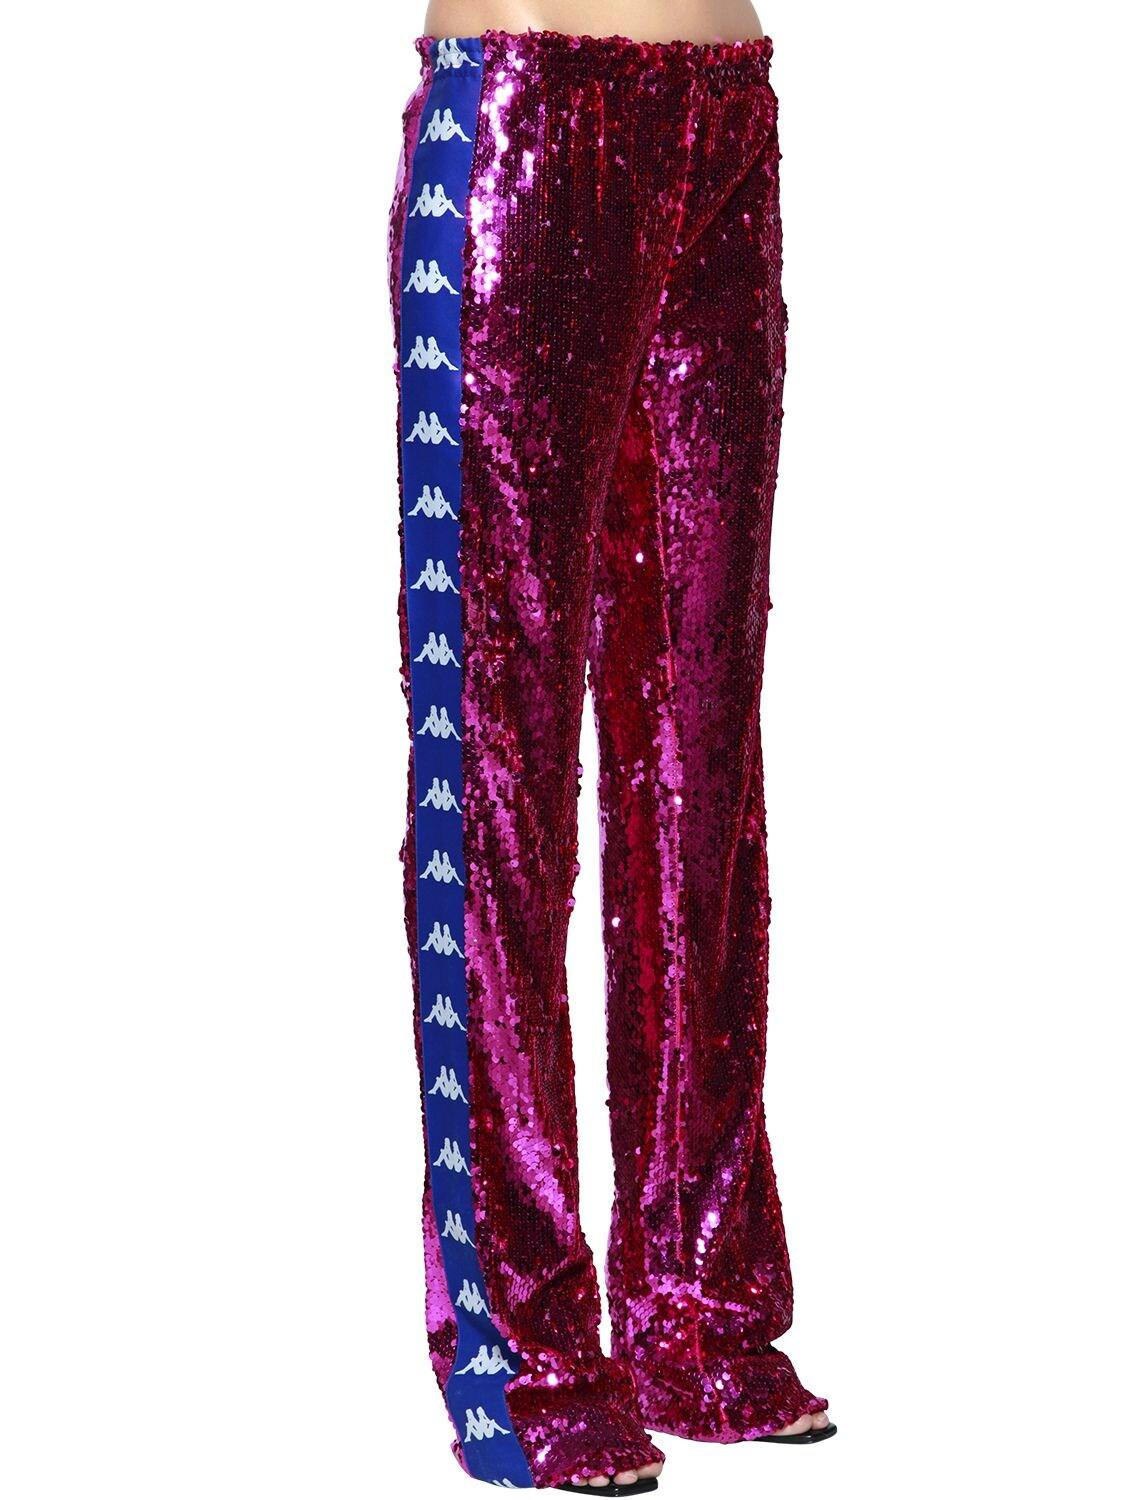 Faith Connexion Kappa Sequined Track Pants | Lyst